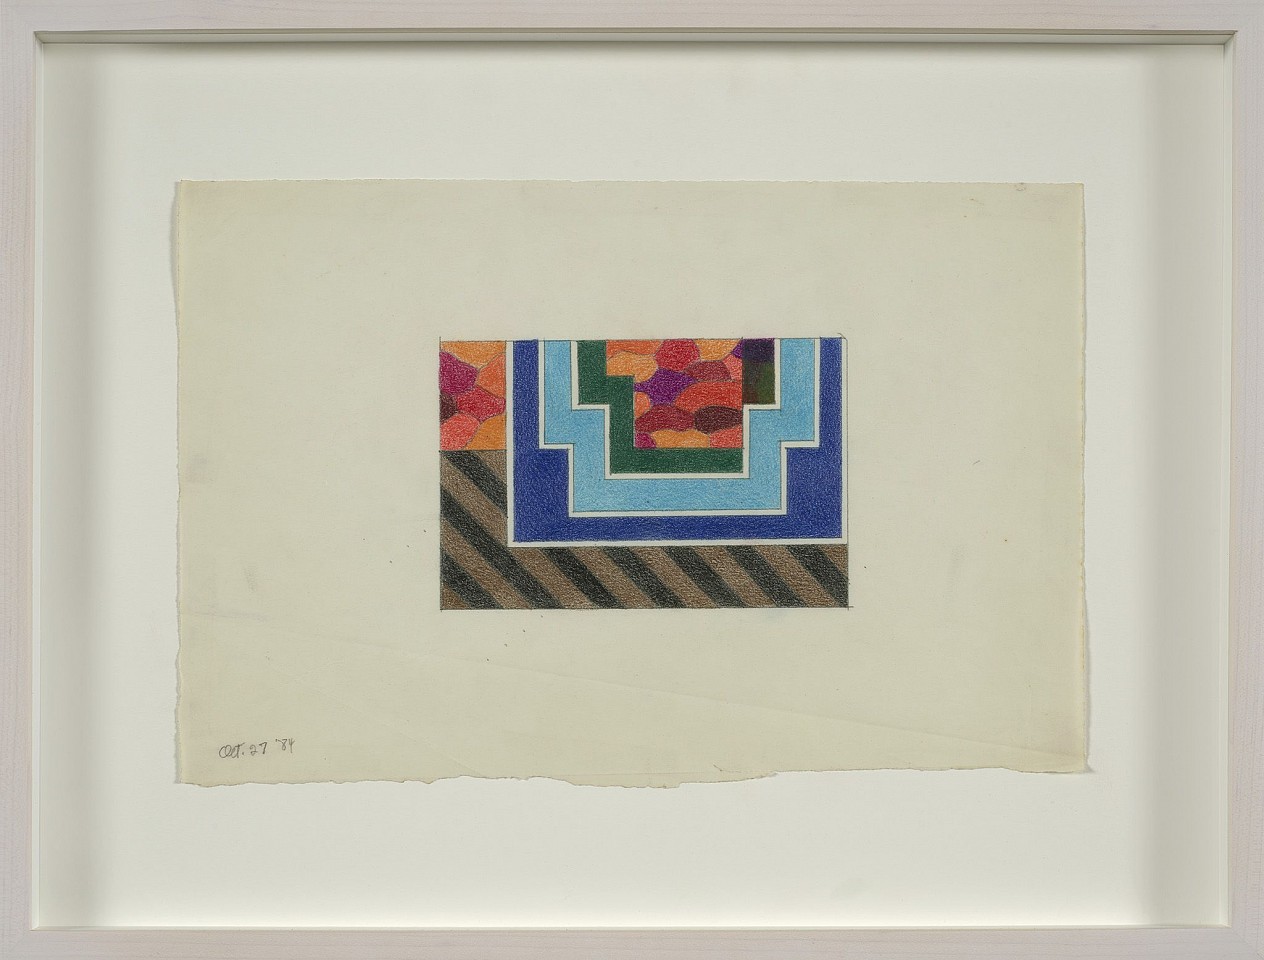 Mary Dill Henry, Untitled (October 27), 1984
Prismacolor and graphite on paper, 9 x 13 1/2 in. (22.9 x 34.3 cm)
MHEN-00173